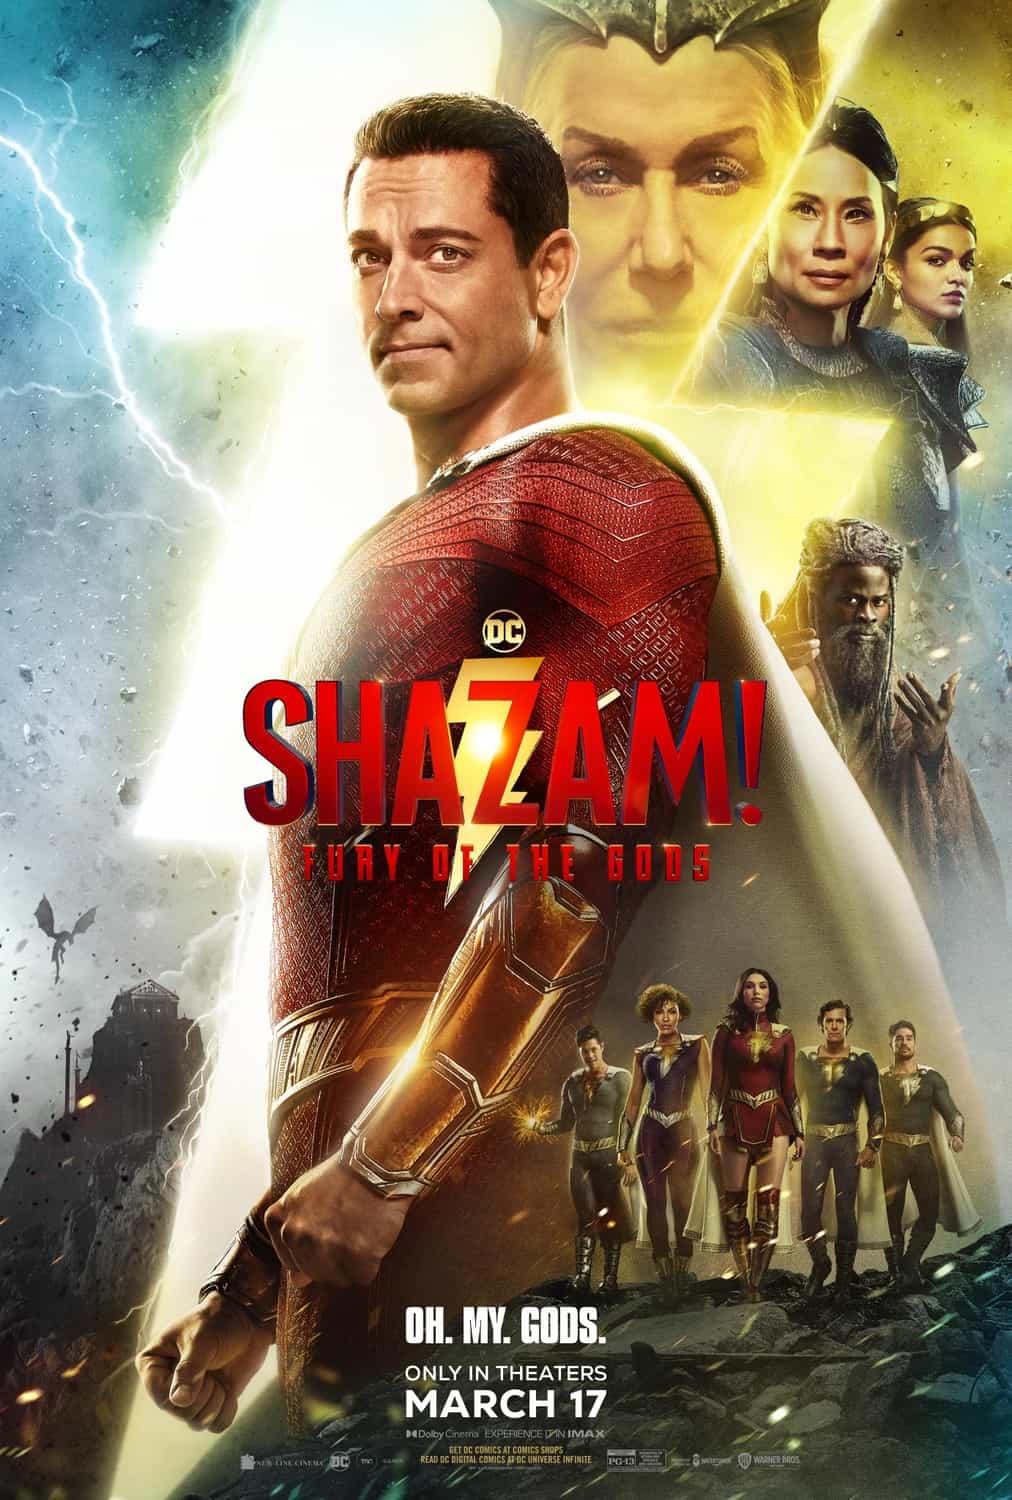 Shazam! Fury of the Gods is given a 12A age rating in the UK for moderate fantasy violence, threat, sex references, implied strong language